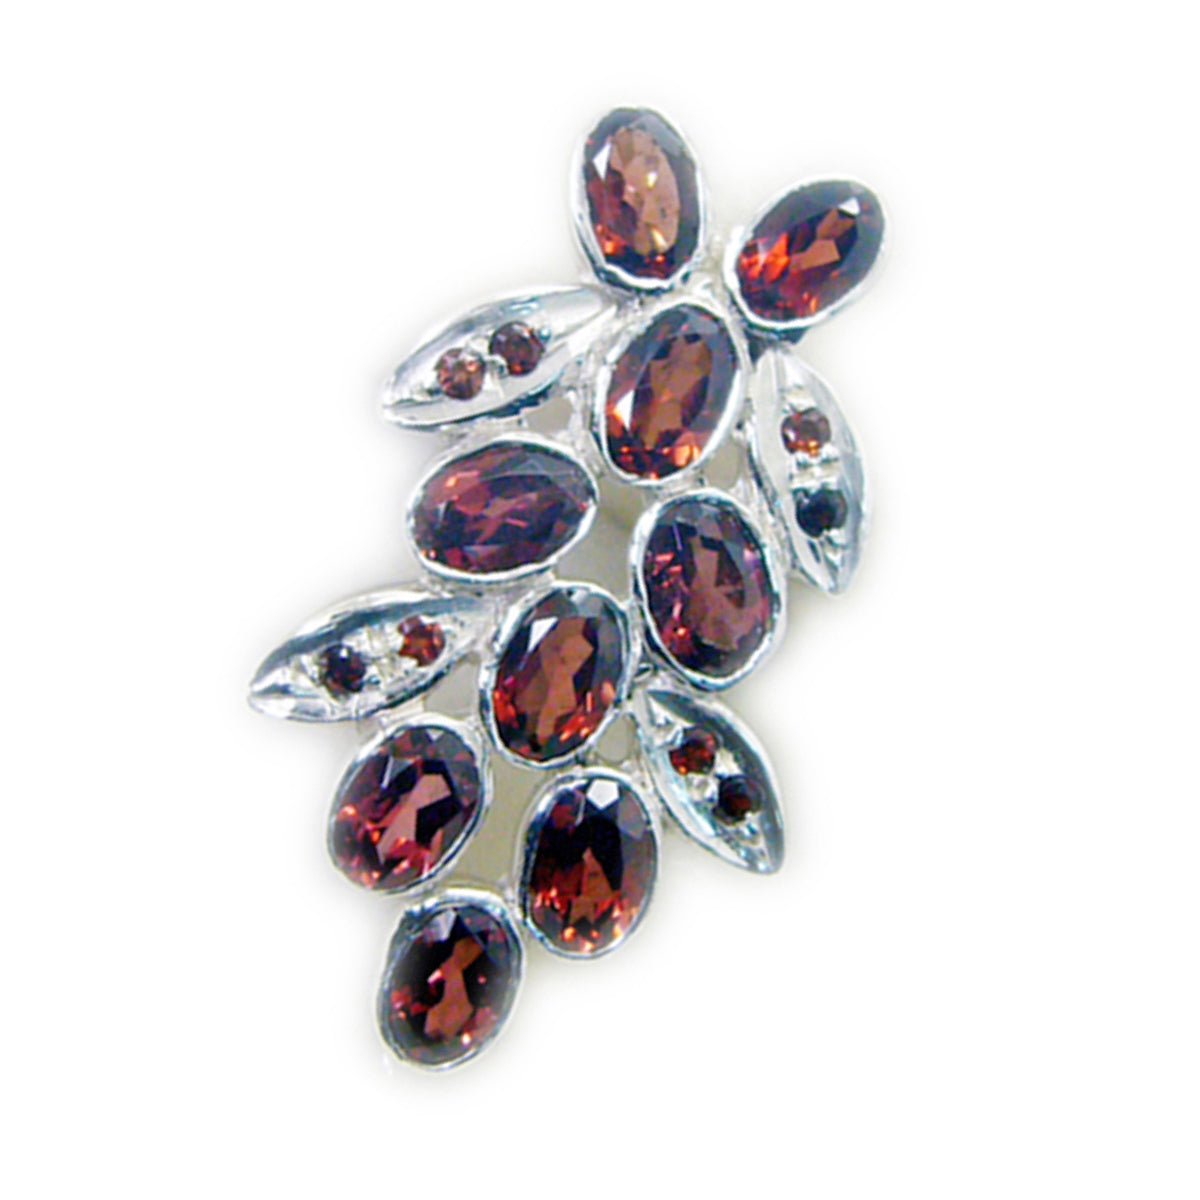 Riyo Bewitching Gems Oval Faceted Red Garnet Solid Silver Pendant Gift For Wedding